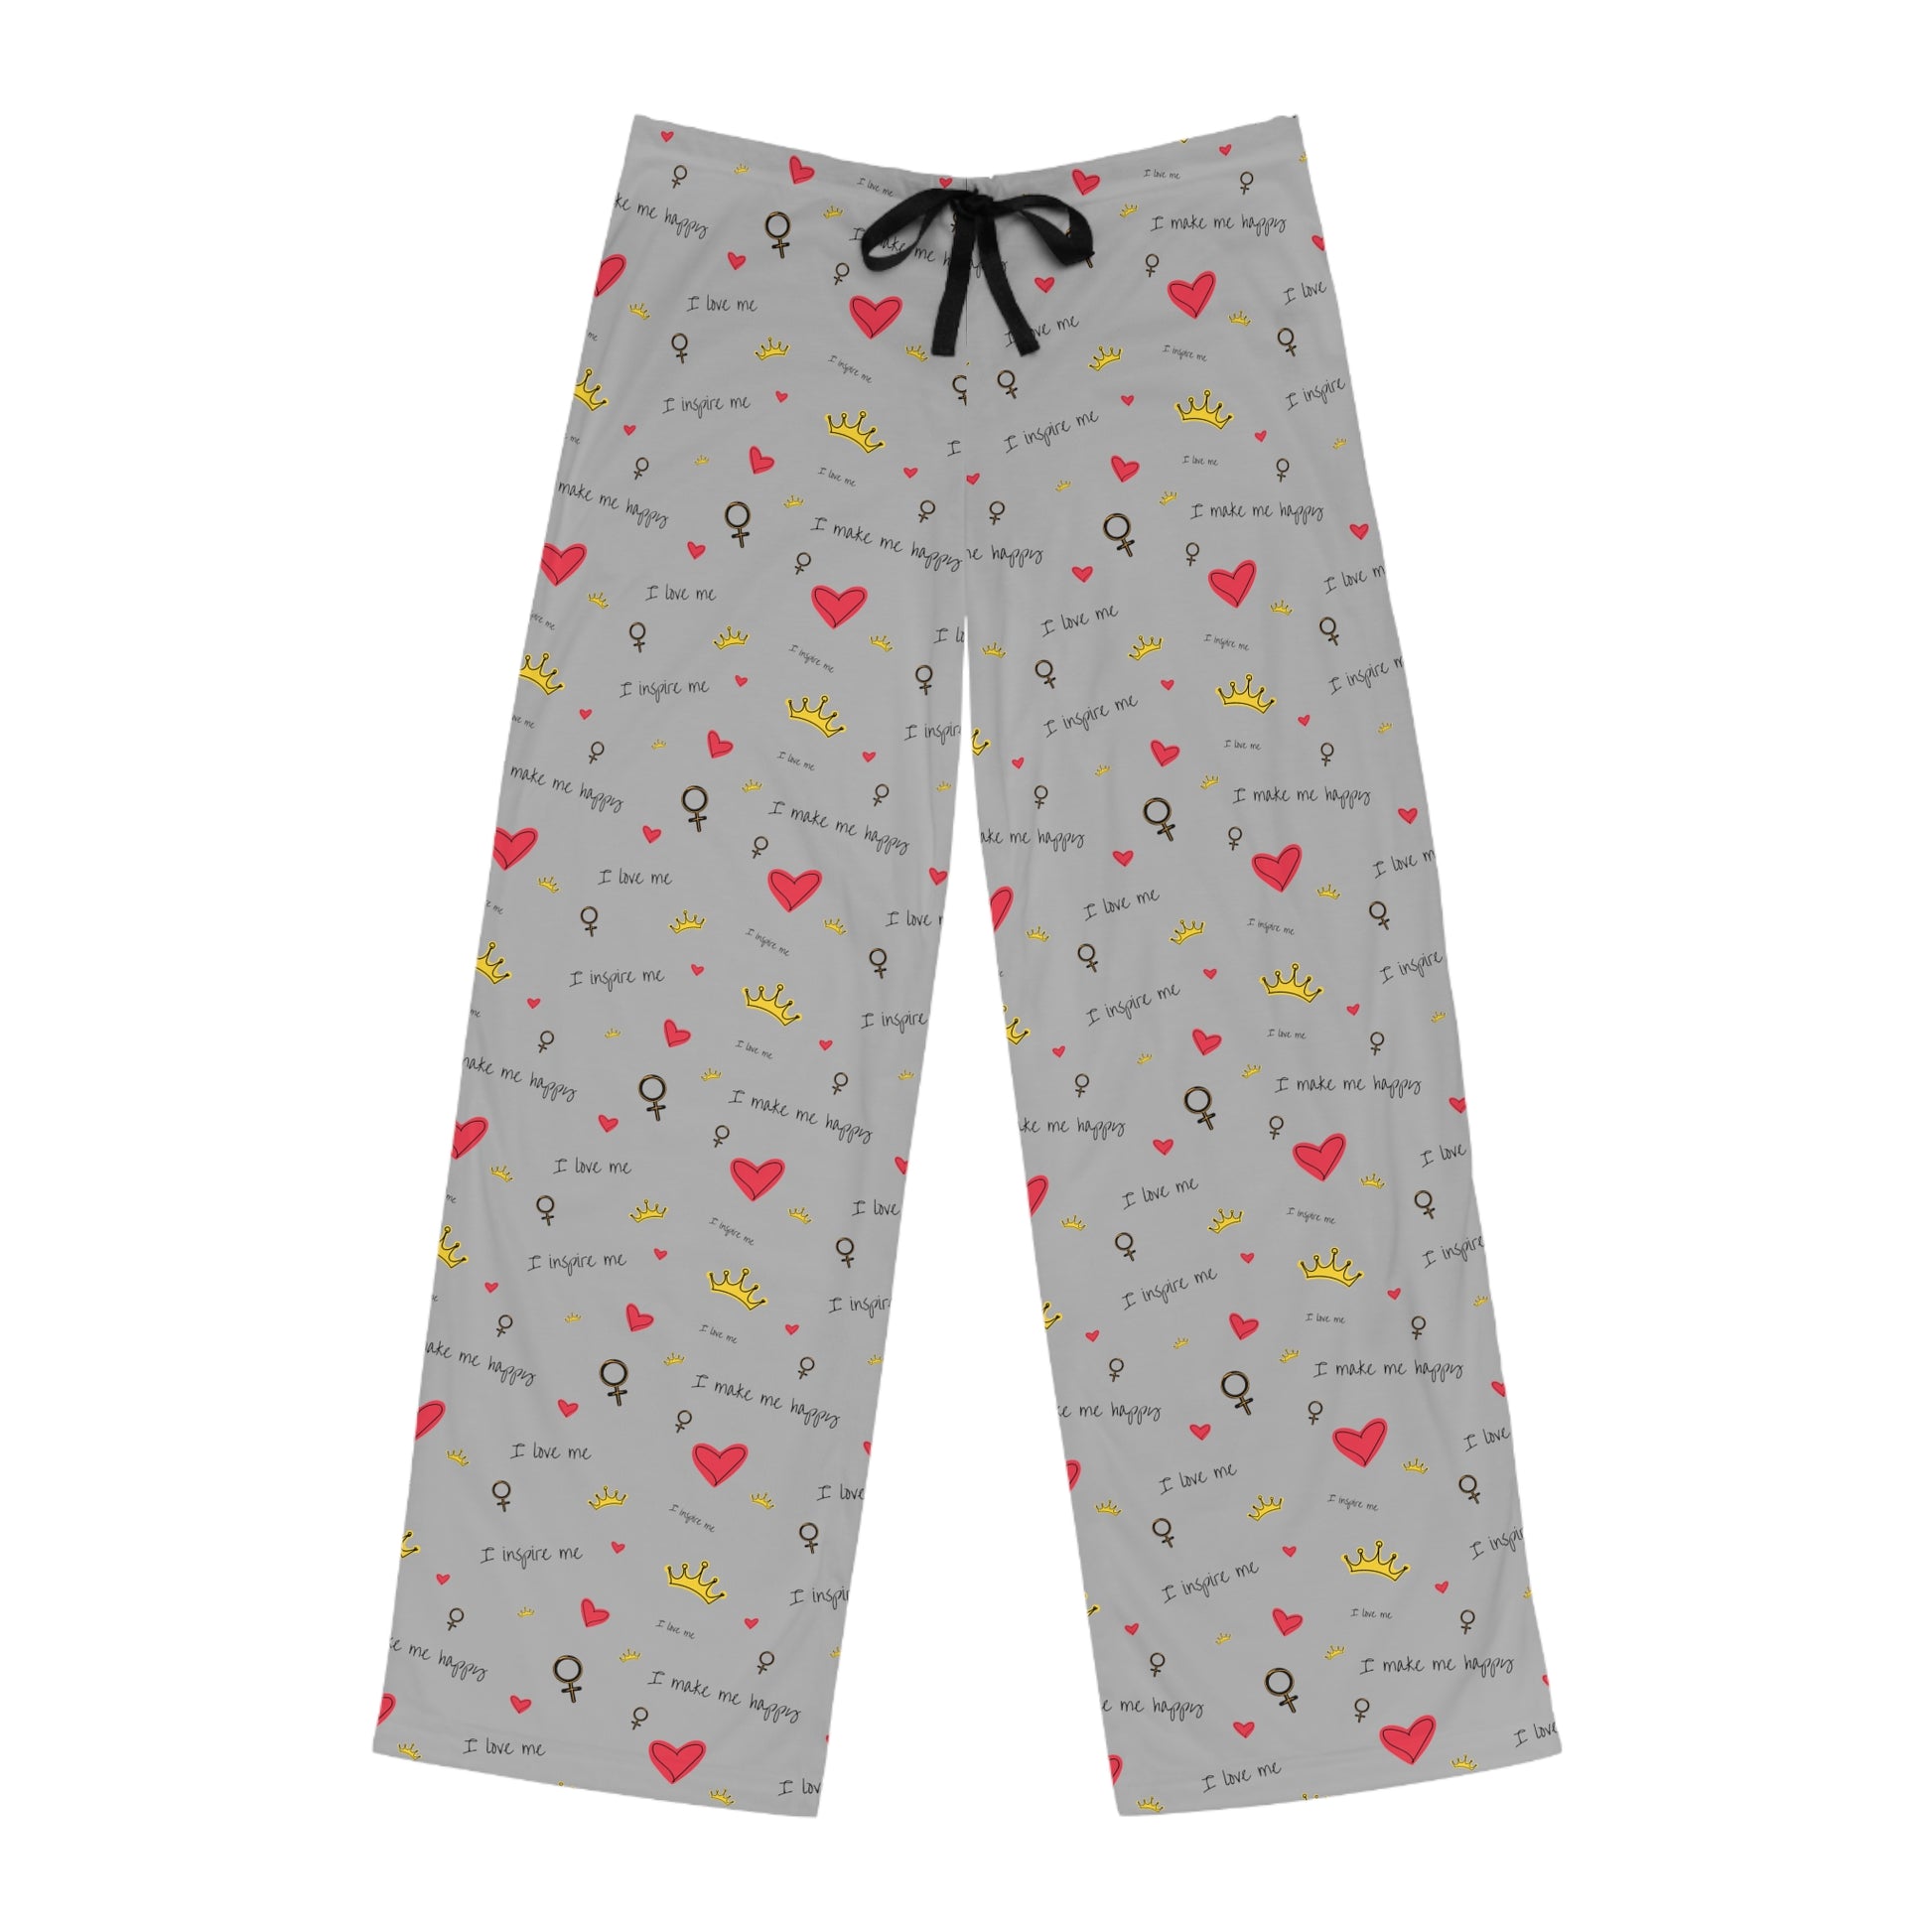 Men's Valentine's Day Gift, a pair of Printify grey polyester jersey pajama pants with hearts on them. The pants have a relaxed fit, elastic waistband, and drawstring closure.